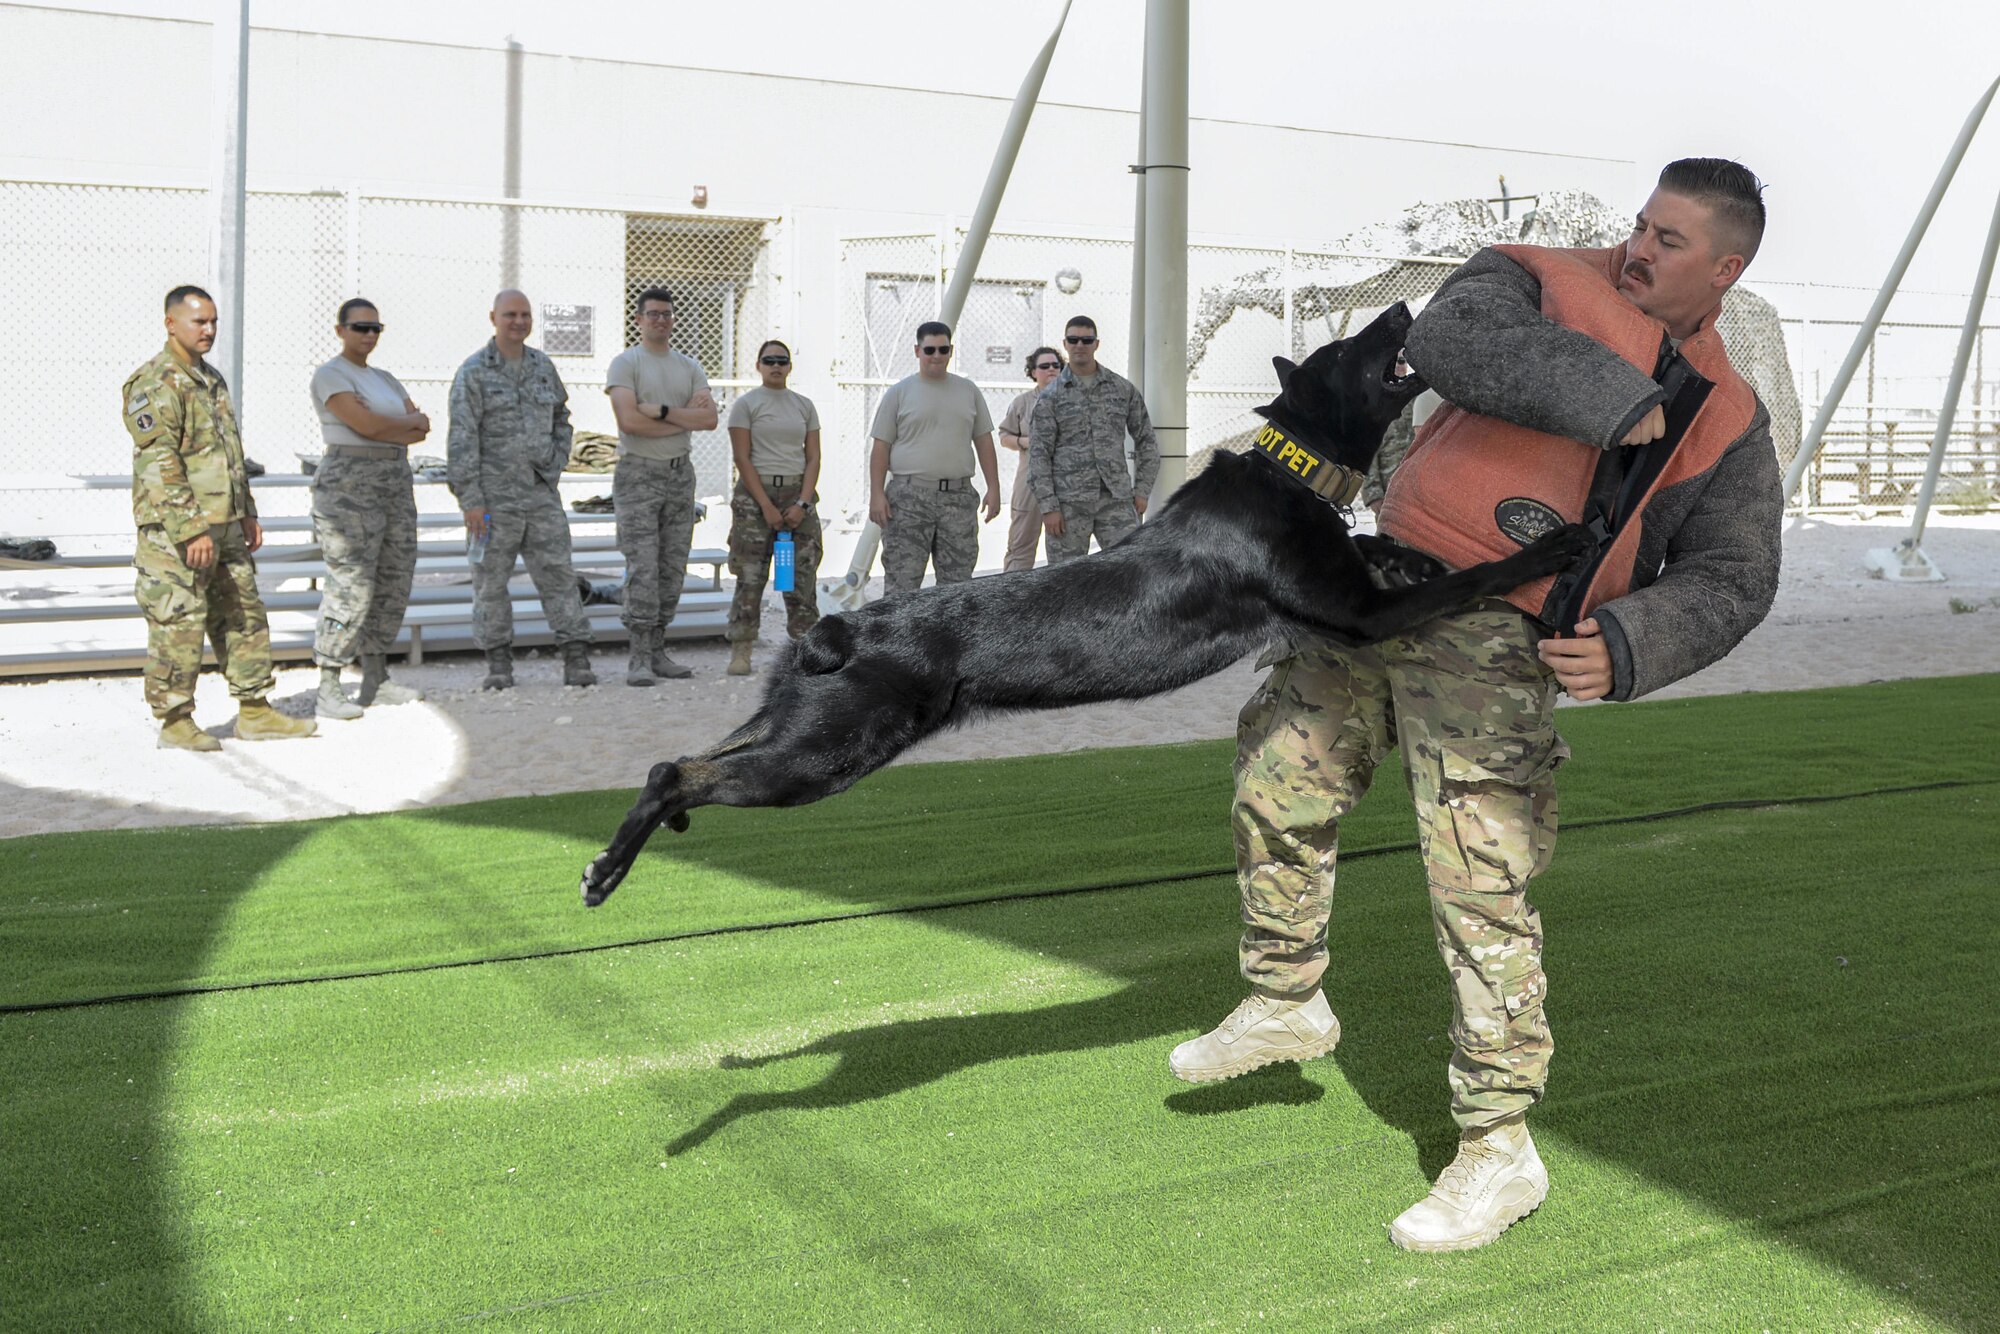 U.S. Air Force Staff Sgt. Brandon Stone, military working dog handler assigned to the 379th Expeditionary Security Forces Squadron, braces for impact as military working dog, Cola, attempts to detain him during a K-9 demonstration exercise at Al Udeid Air Base, Qatar, Aug. 17, 2017.